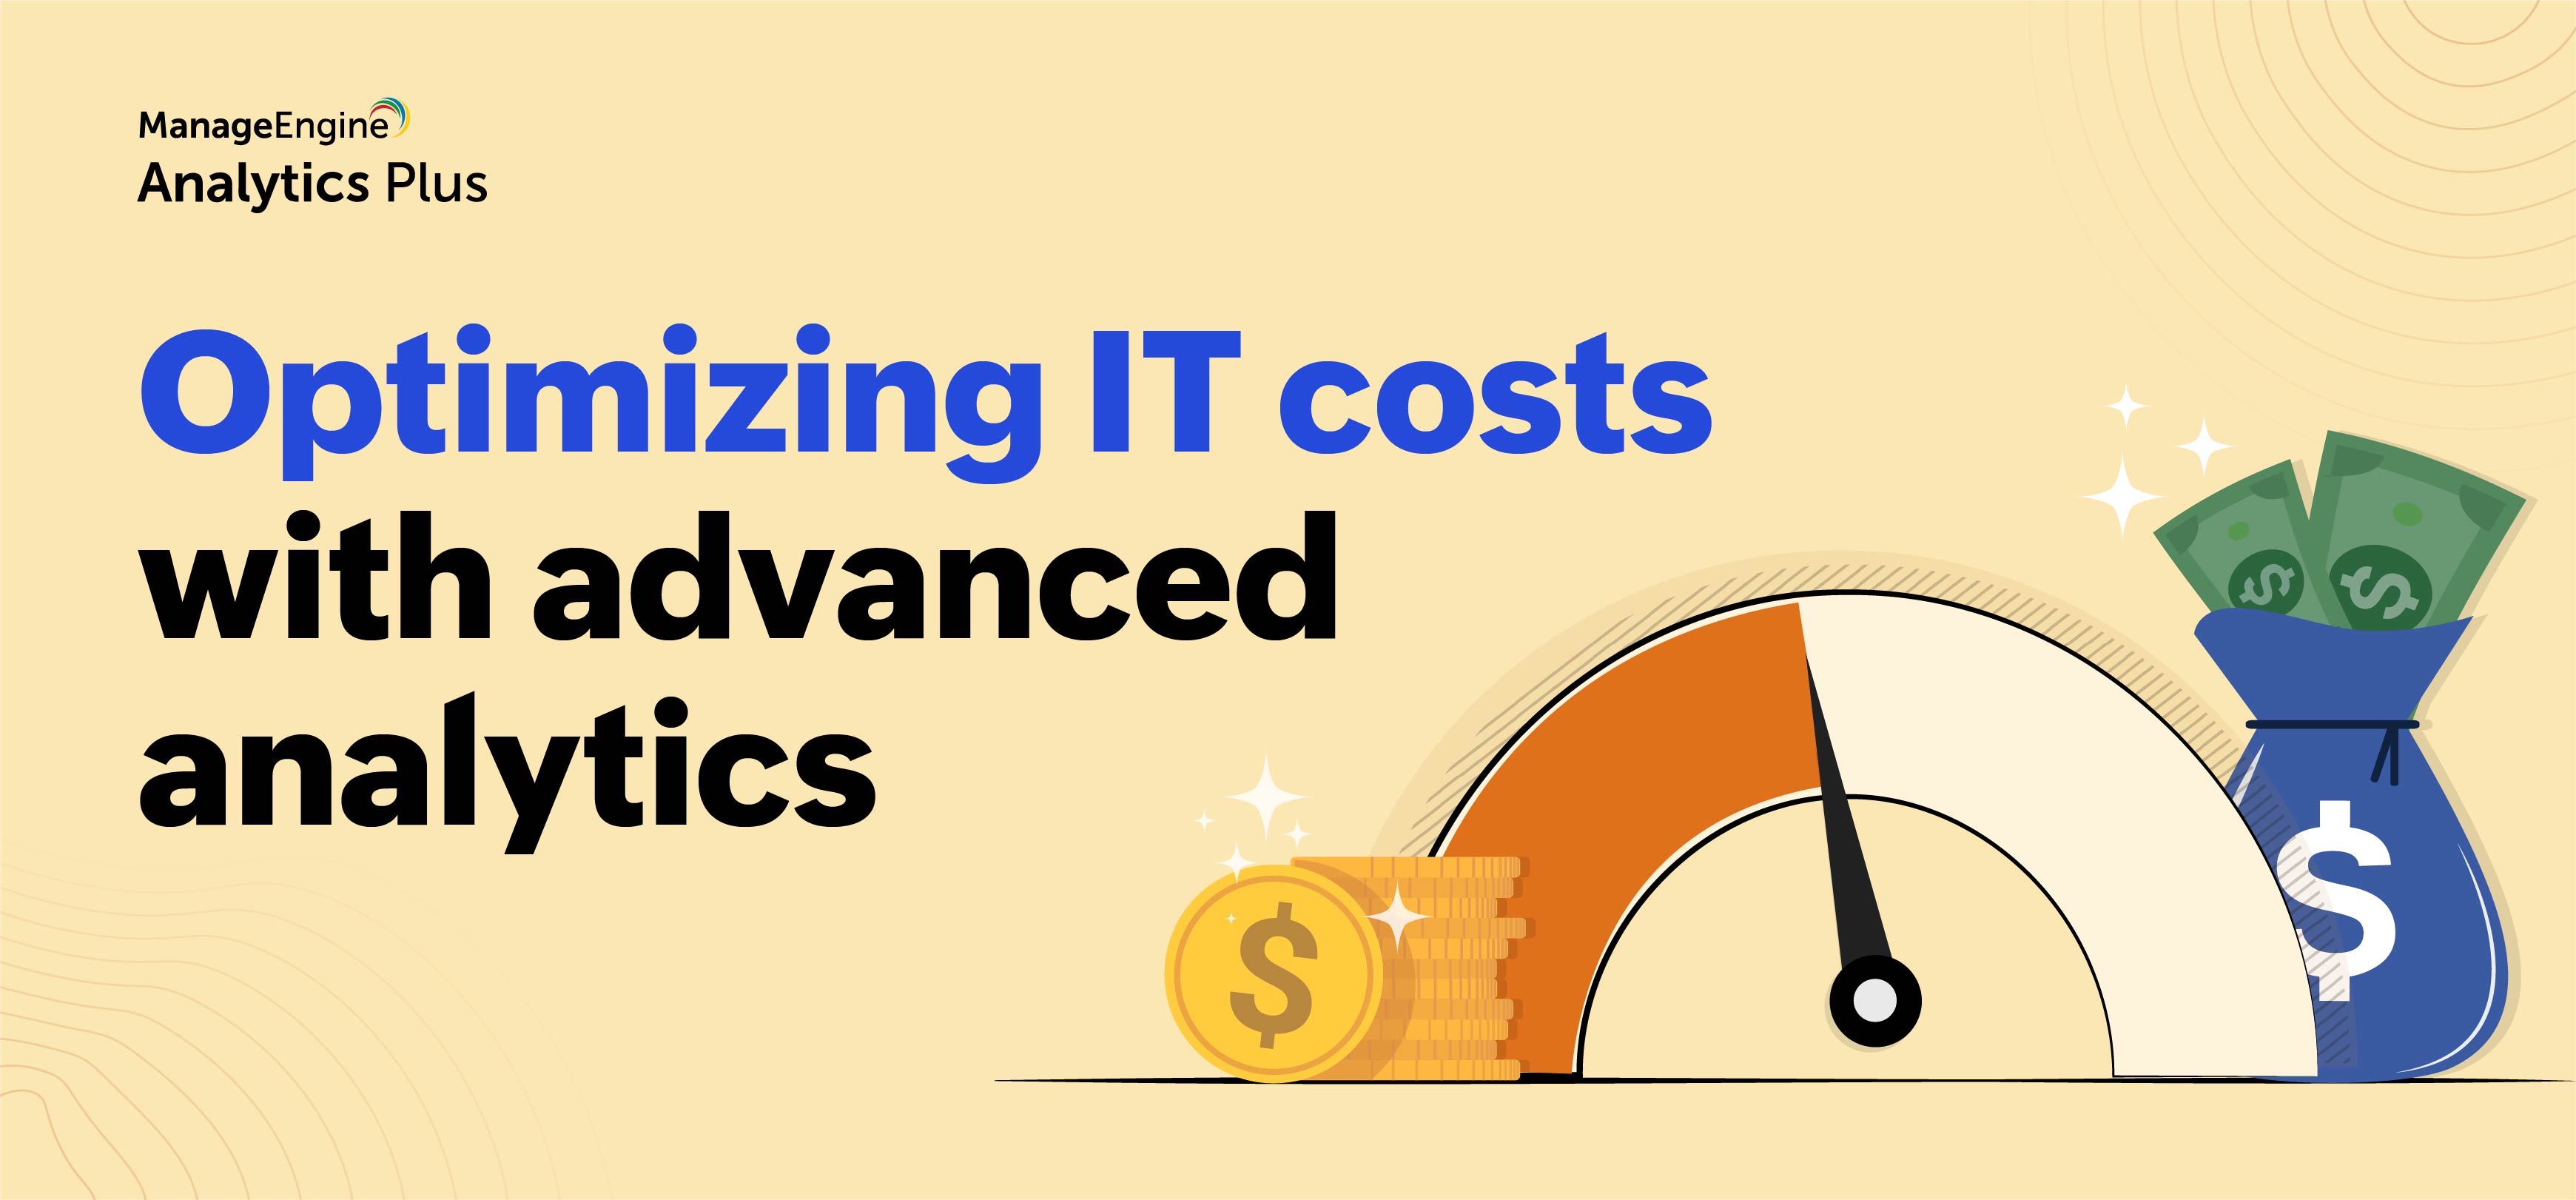 Optimizing IT costs with advanced analytics 